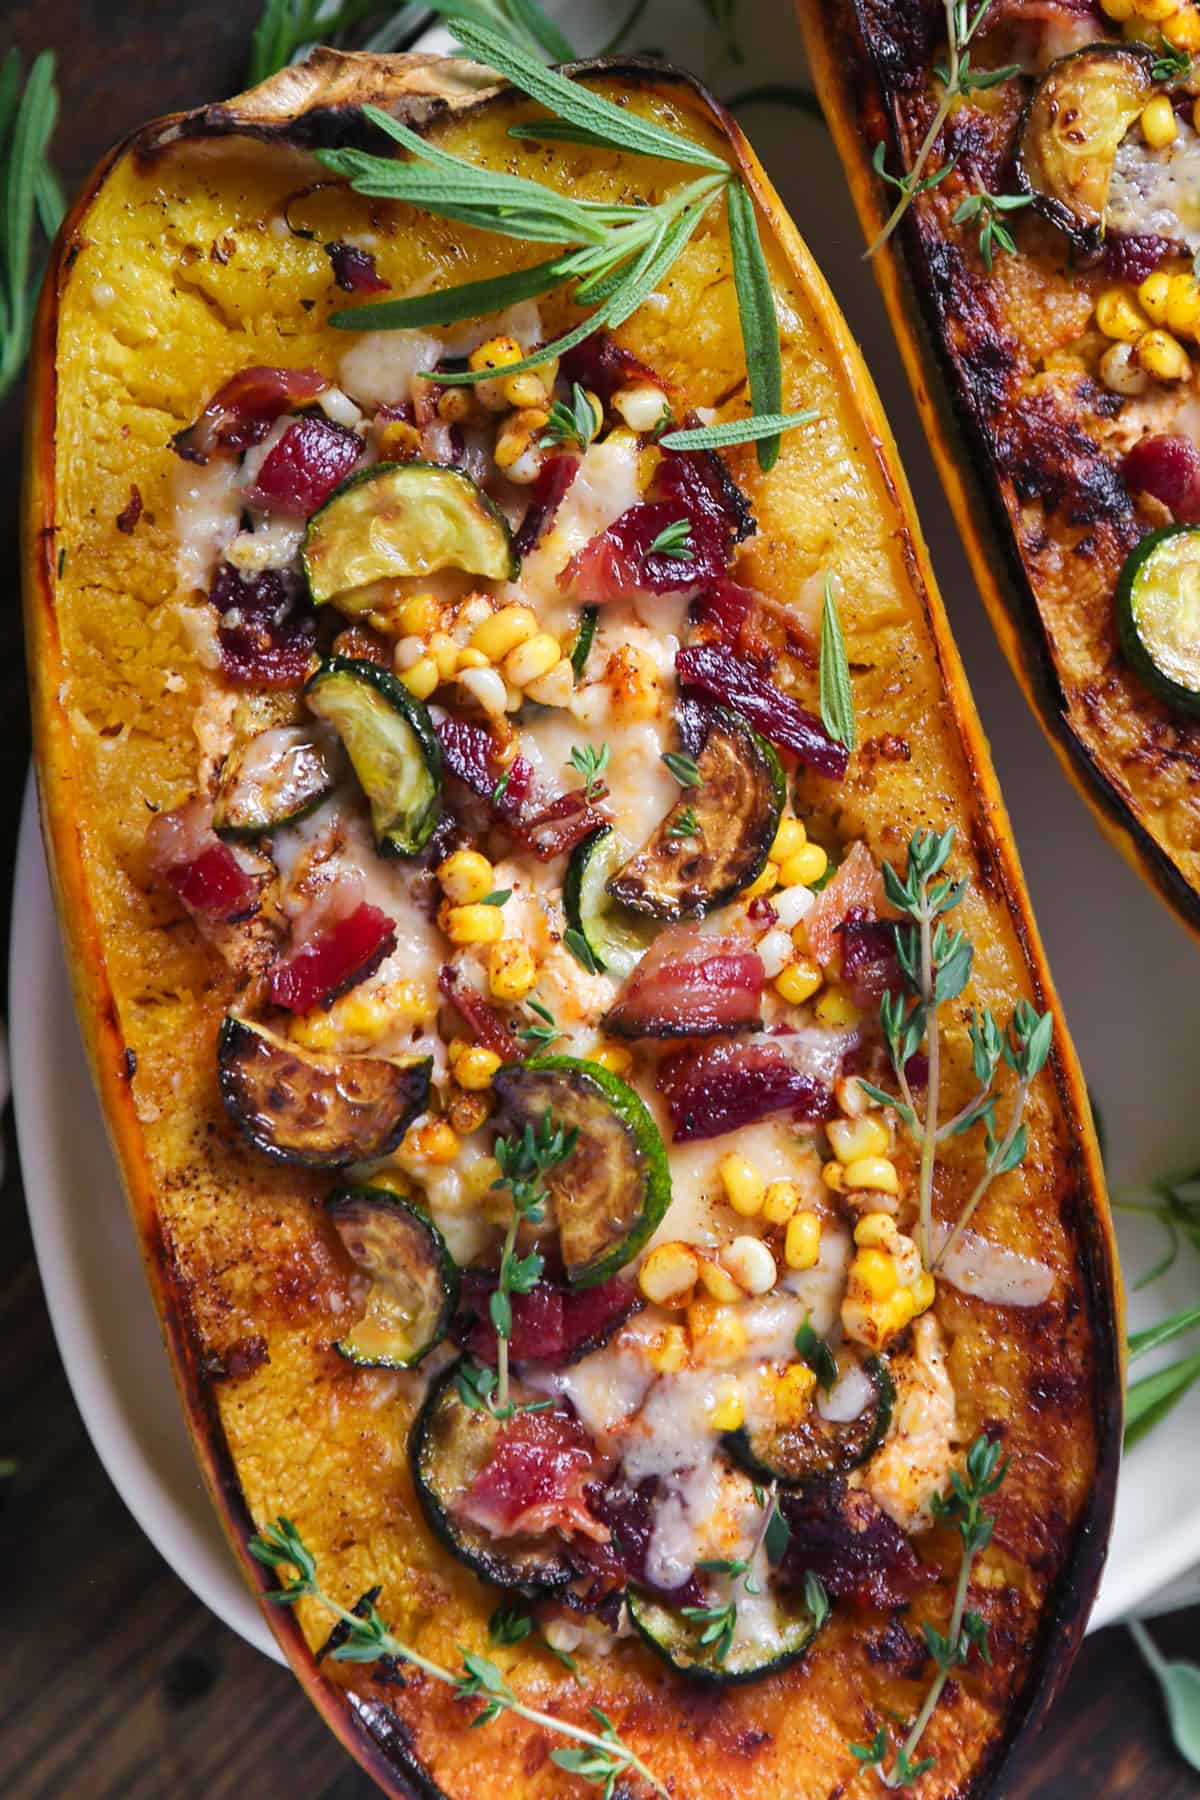 Baked Spaghetti Squash Half (one half) with Zucchini, Corn, Bacon, and Cheese mixture - on a white platter.